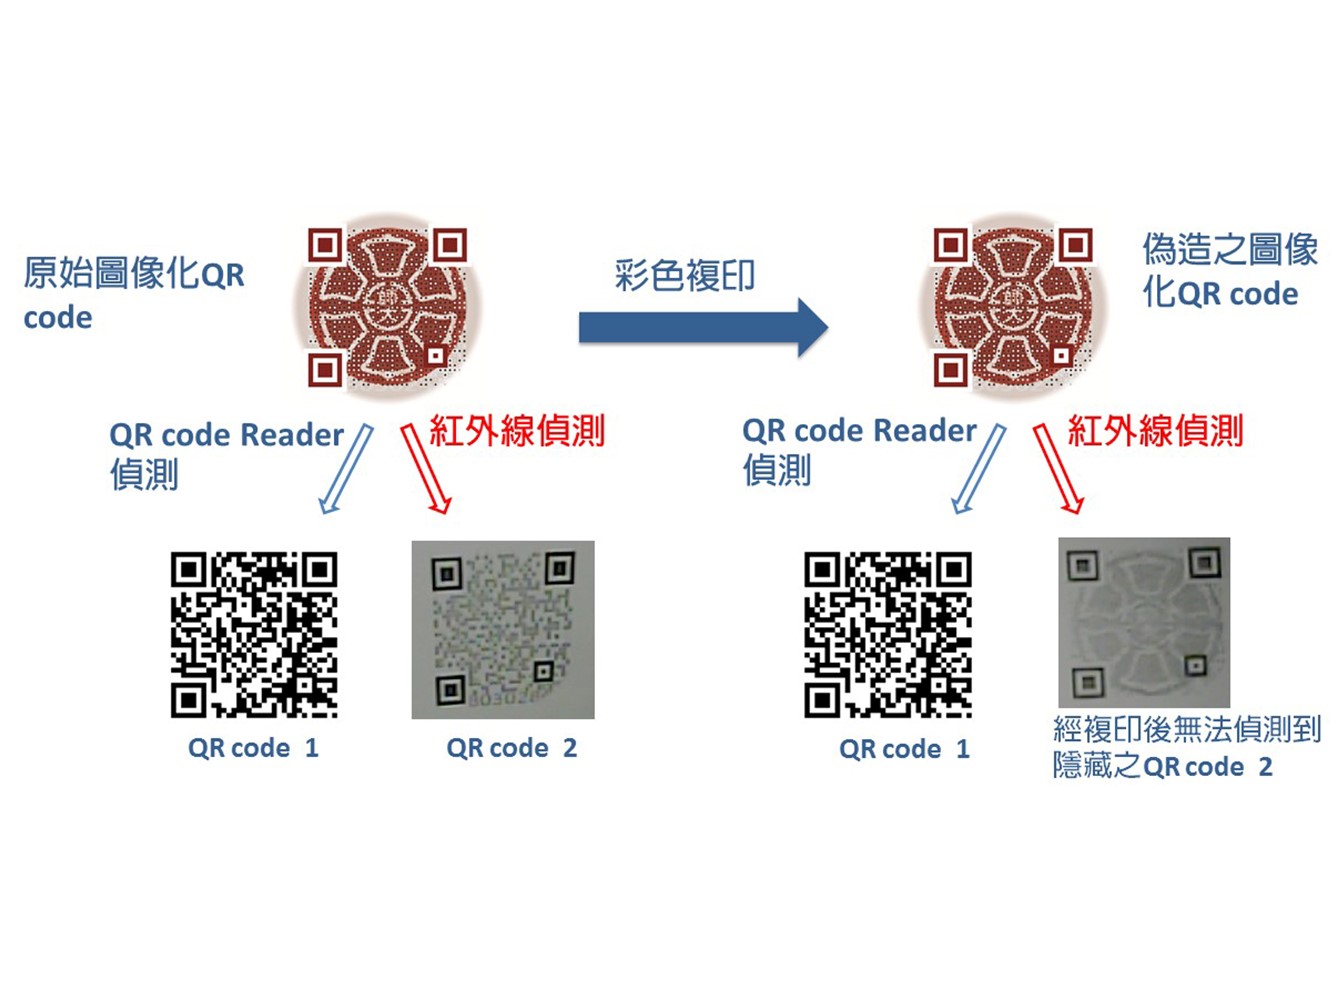 Multiple Anti-counterfeiting FeaturesValue-added Applications for Graphic QR Code